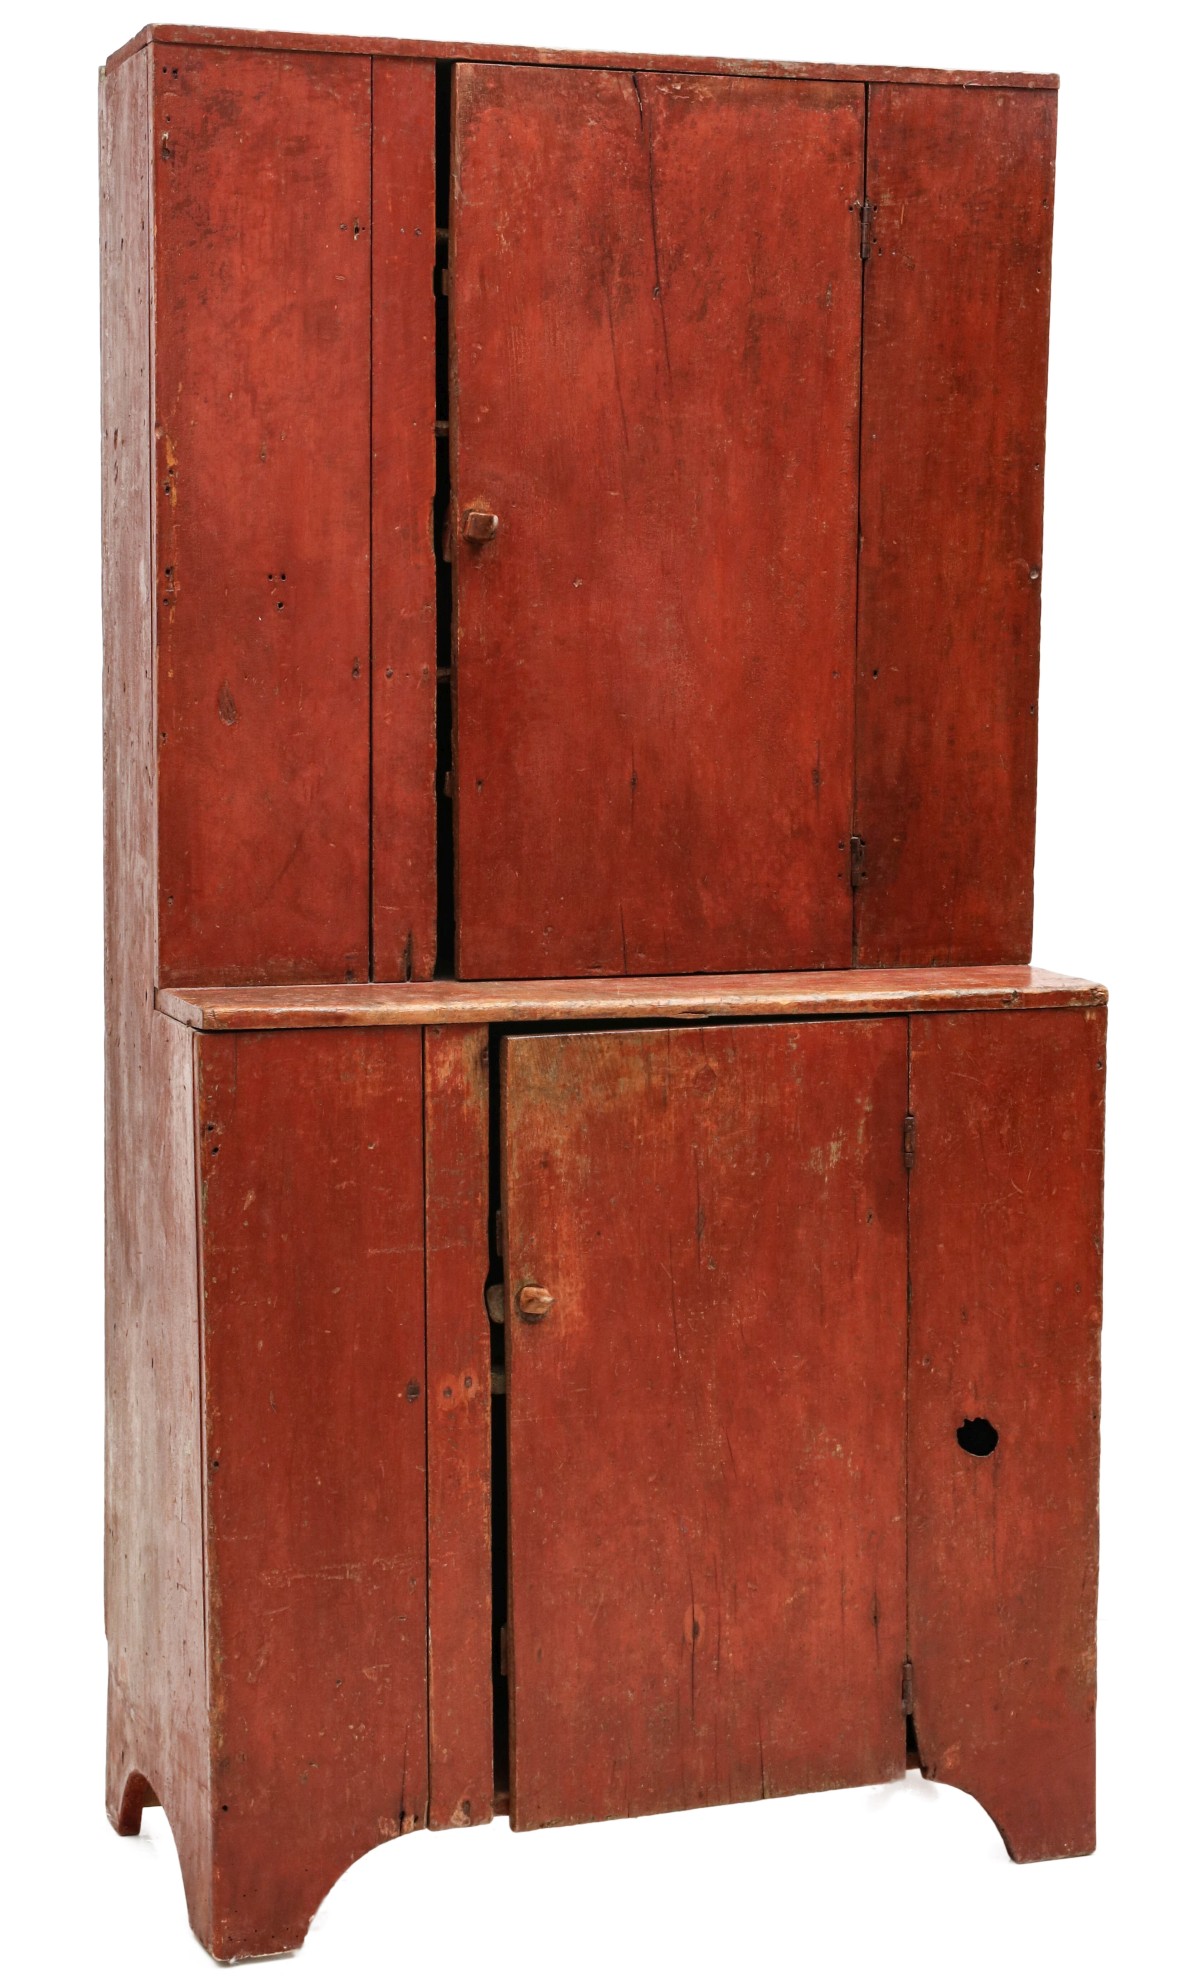 AN EARLY 19TH C. NEW ENGLAND PAINTED STEP BACK CUPBOARD